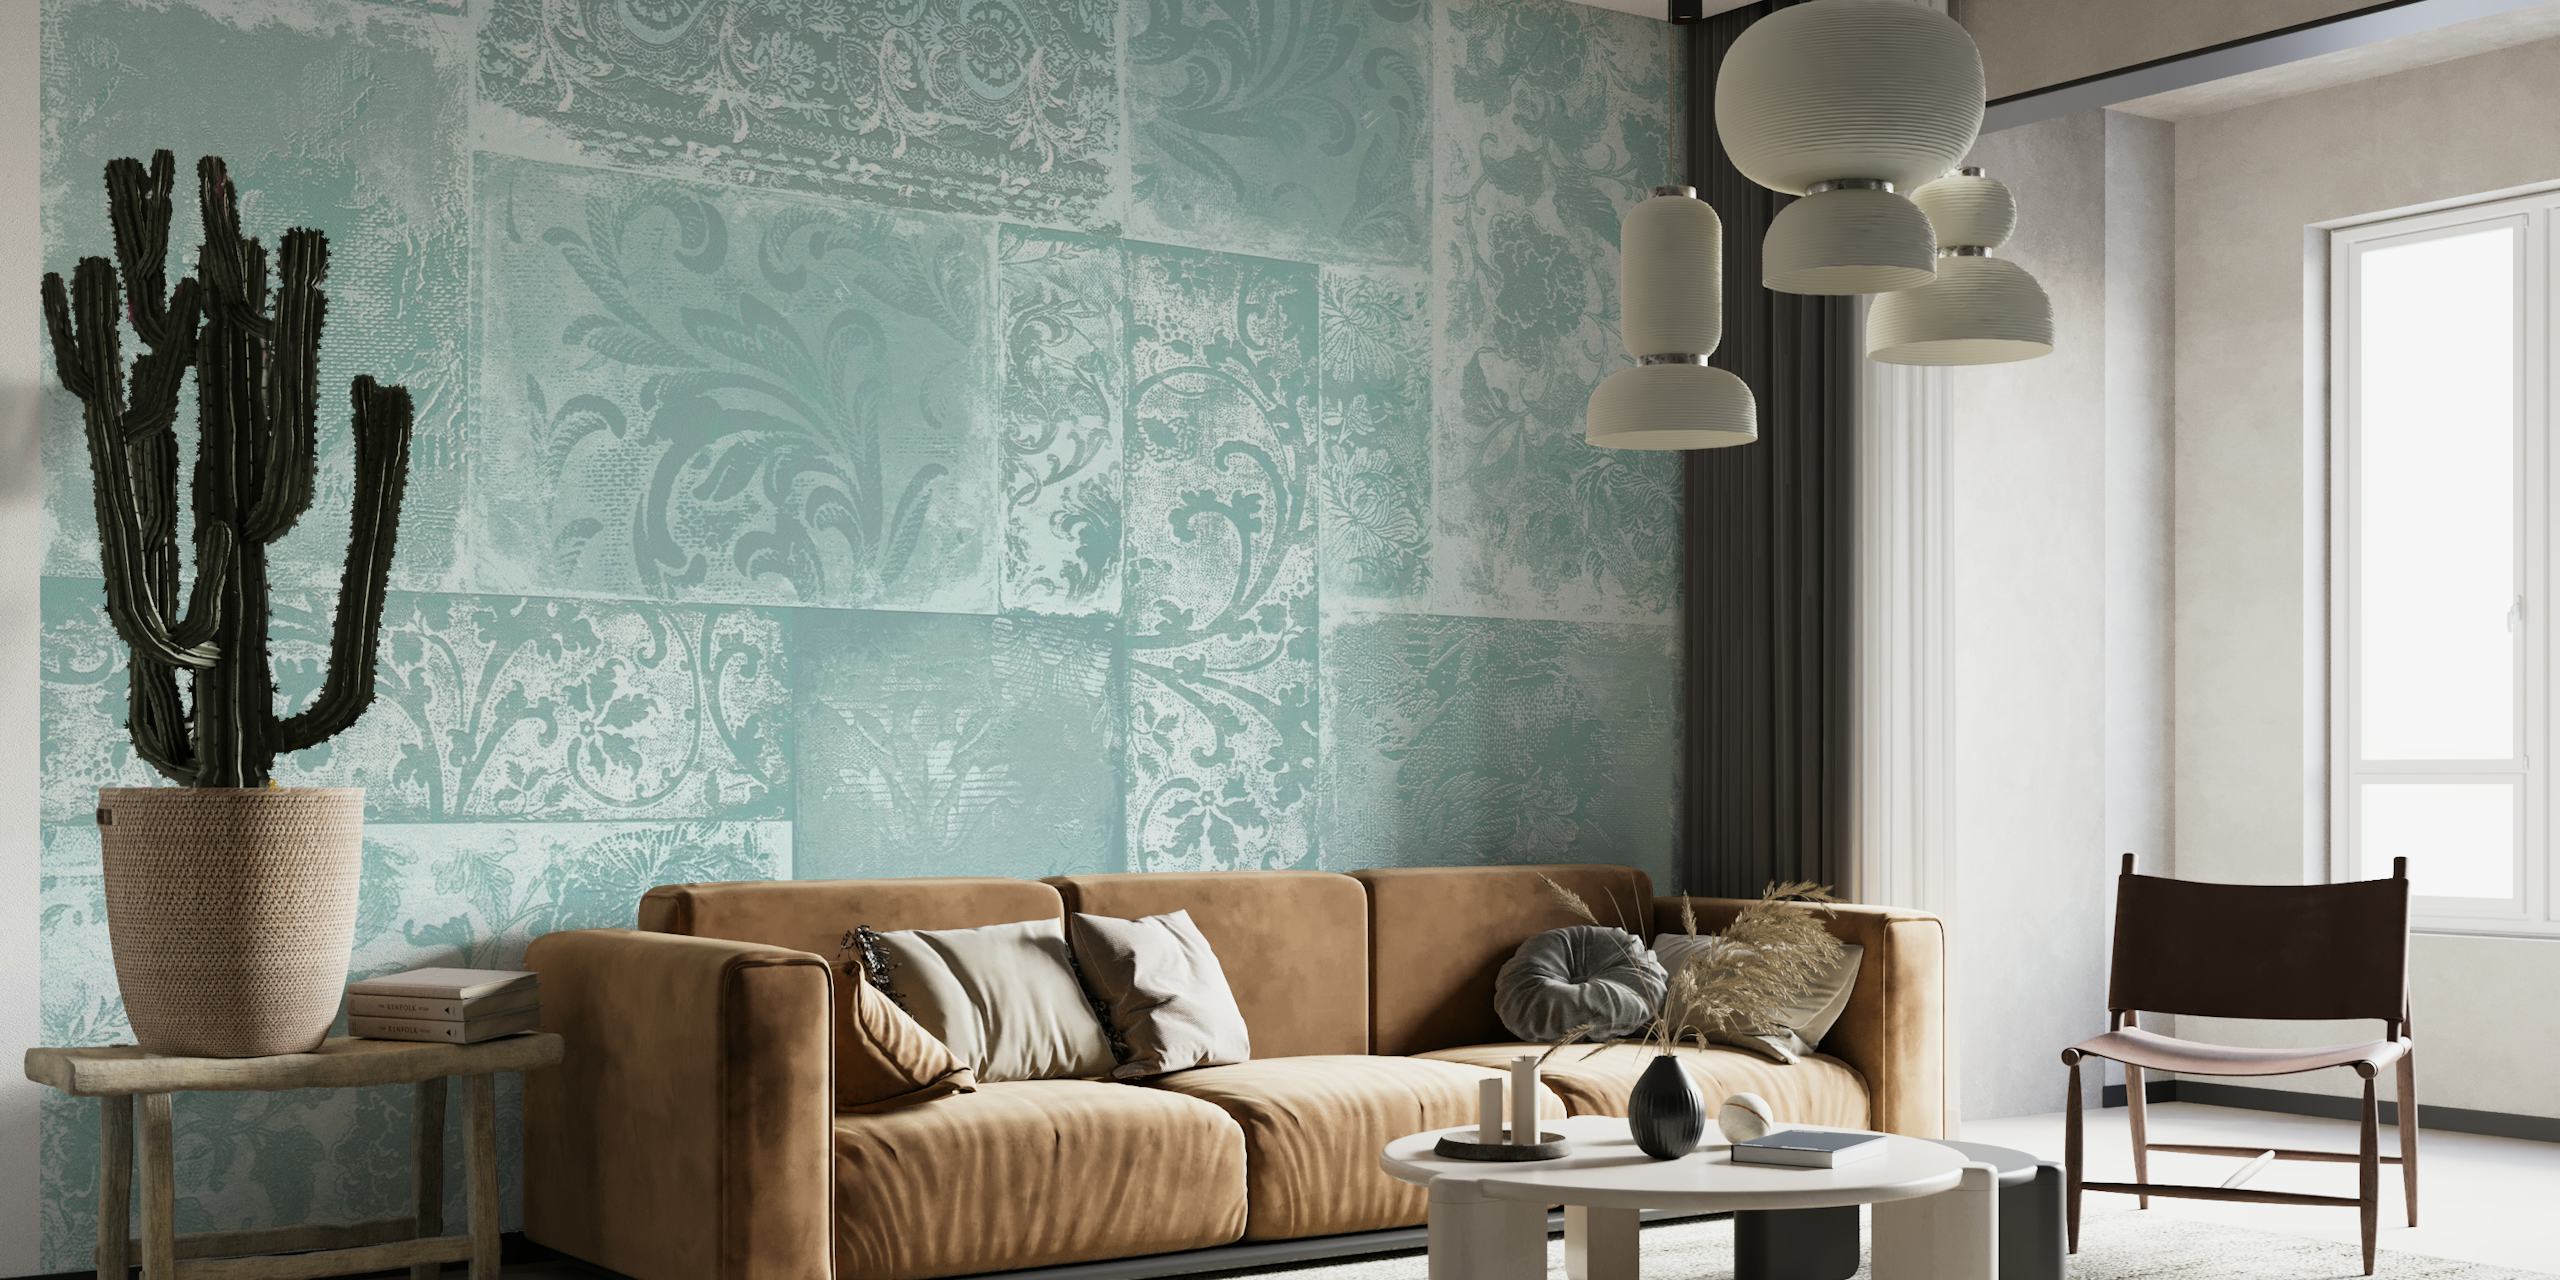 Bohemian Patchwork Turquoise wall mural featuring a blend of ornate patterns in soft hues.